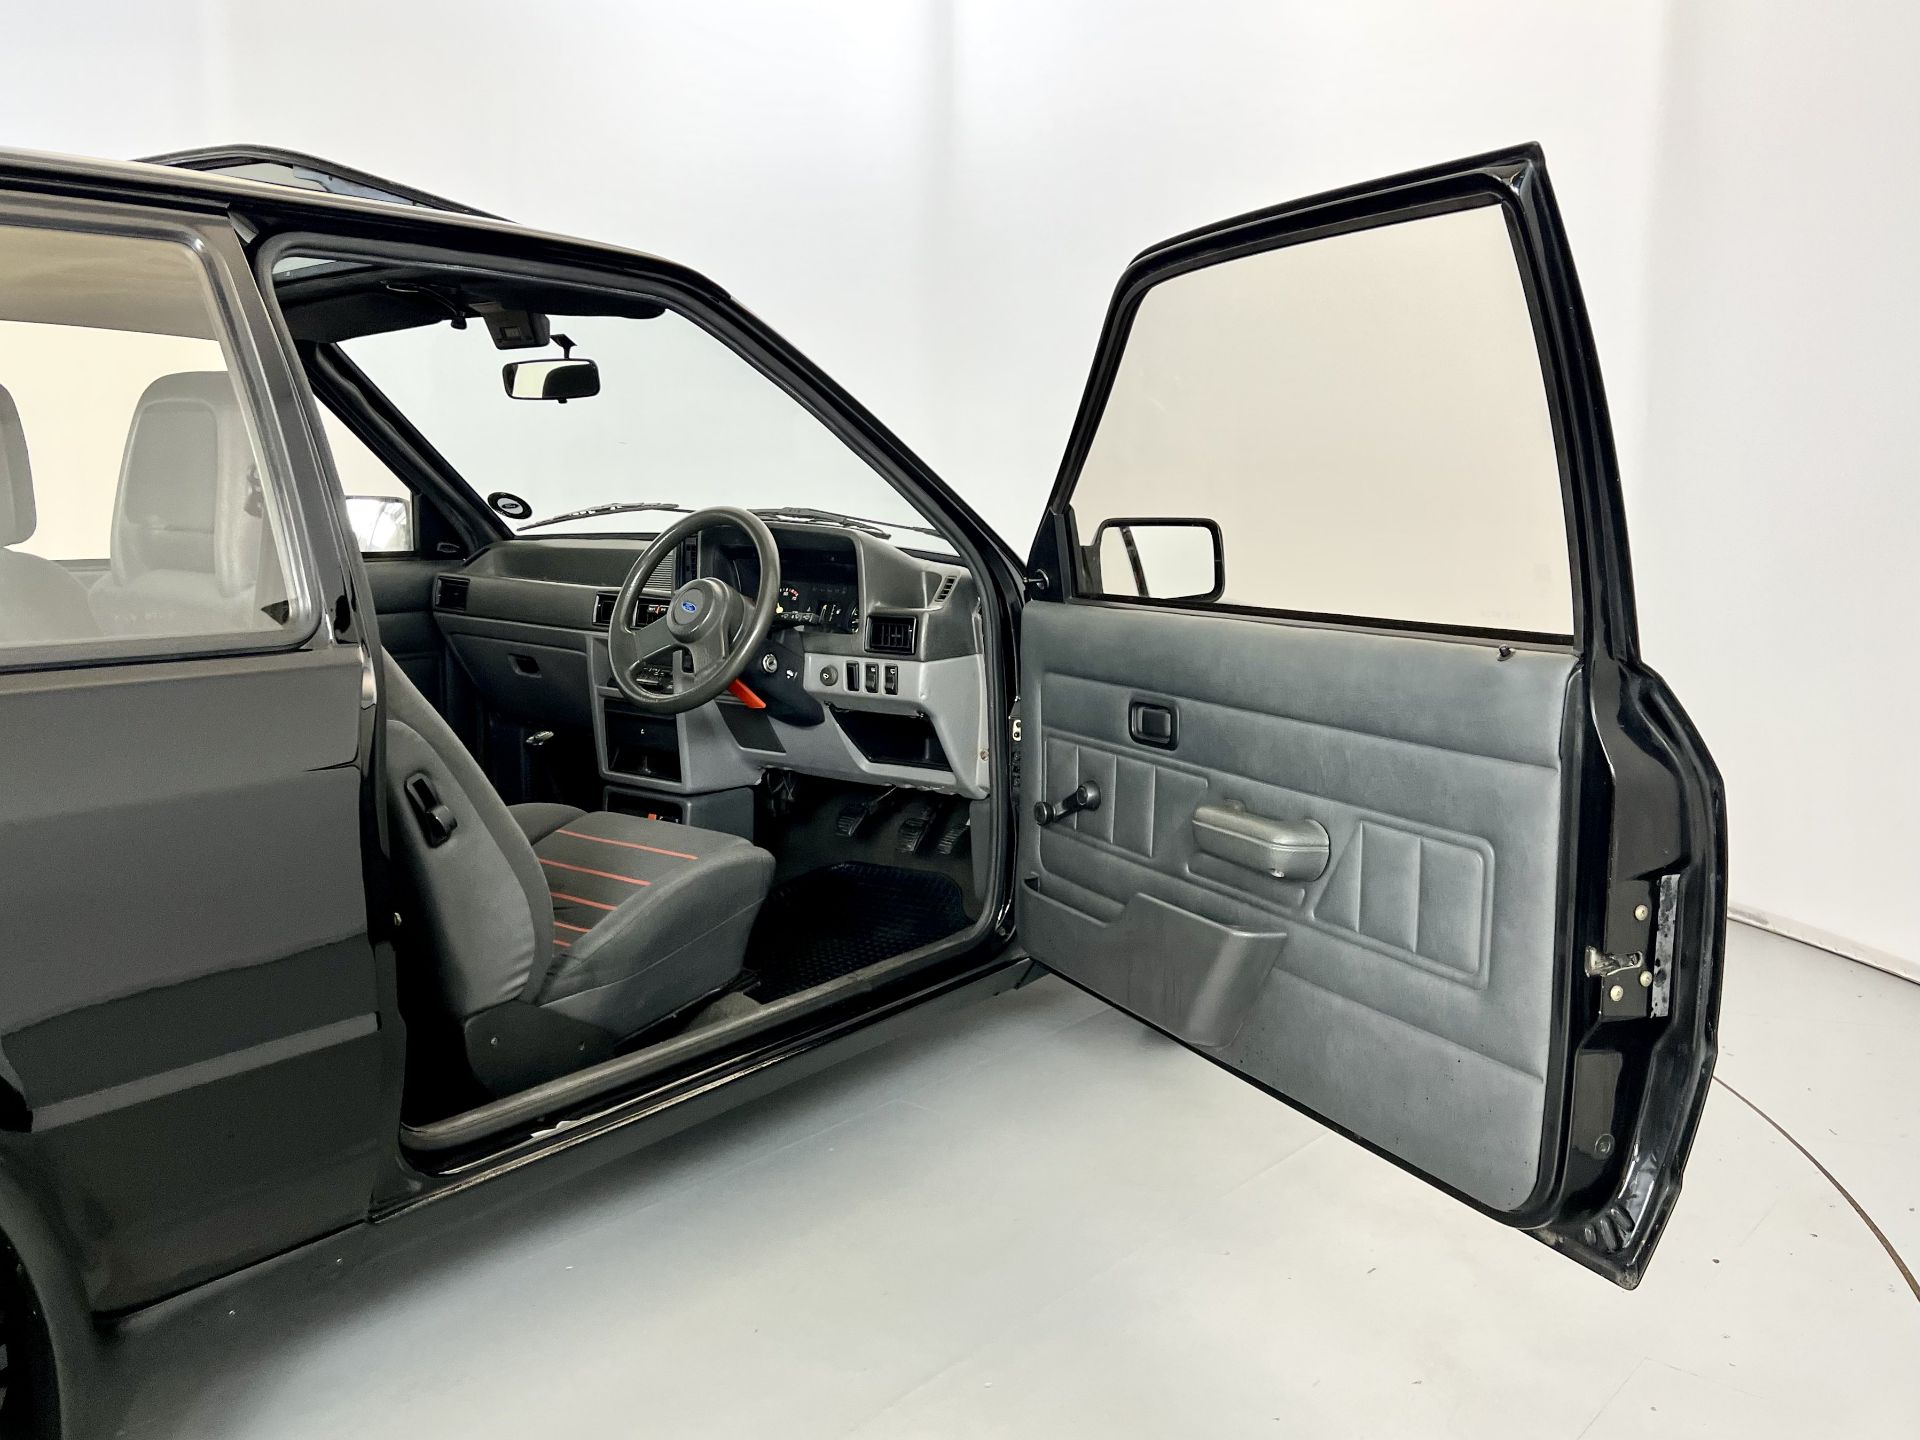 Ford Escot XR3 SVO - Image 18 of 31